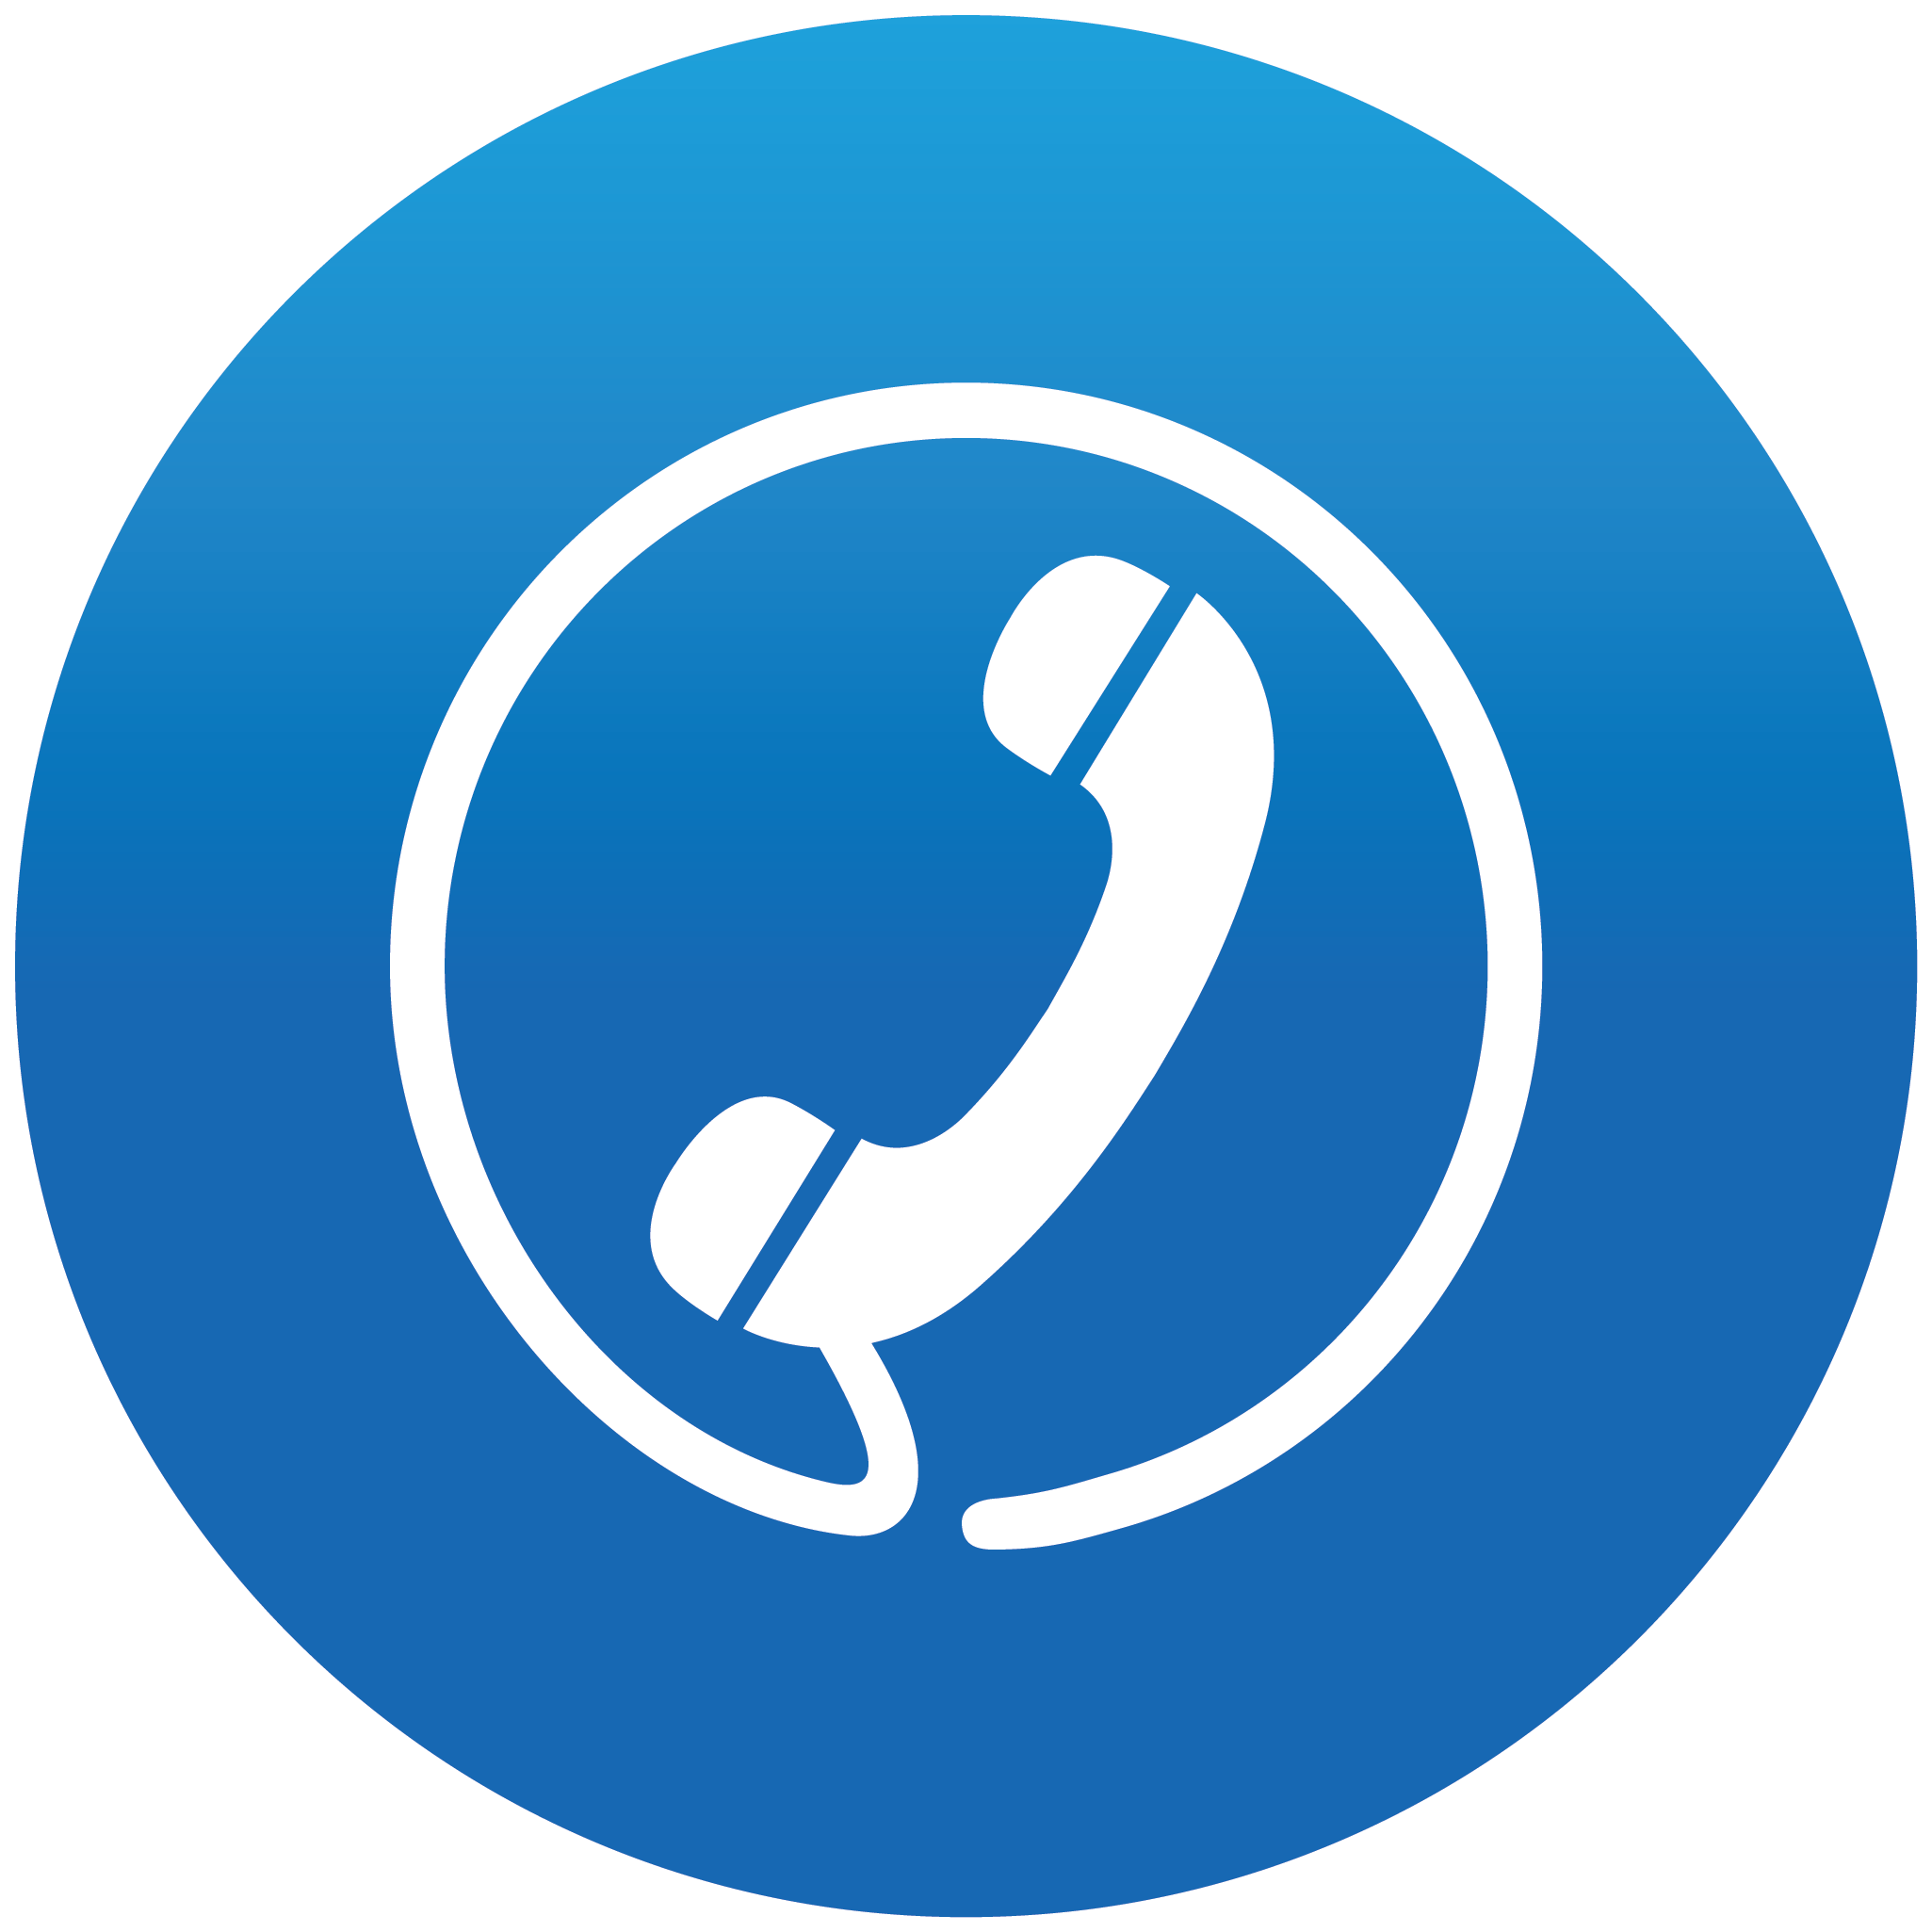 10-106821_telephone-free-download-png-telephone-icon-png-clipart